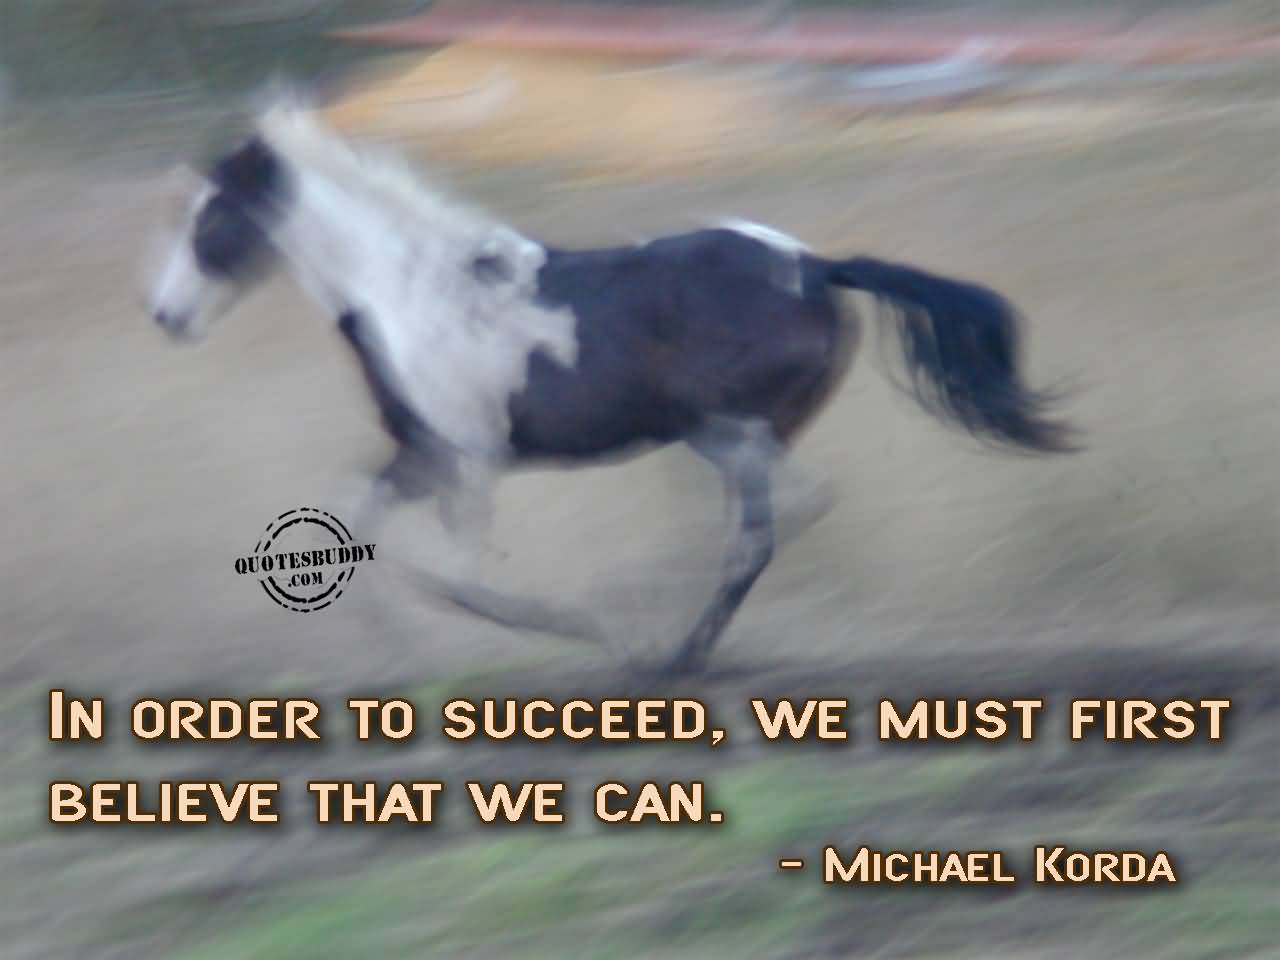 To succeed, we must first believe that we can -Michael Korda